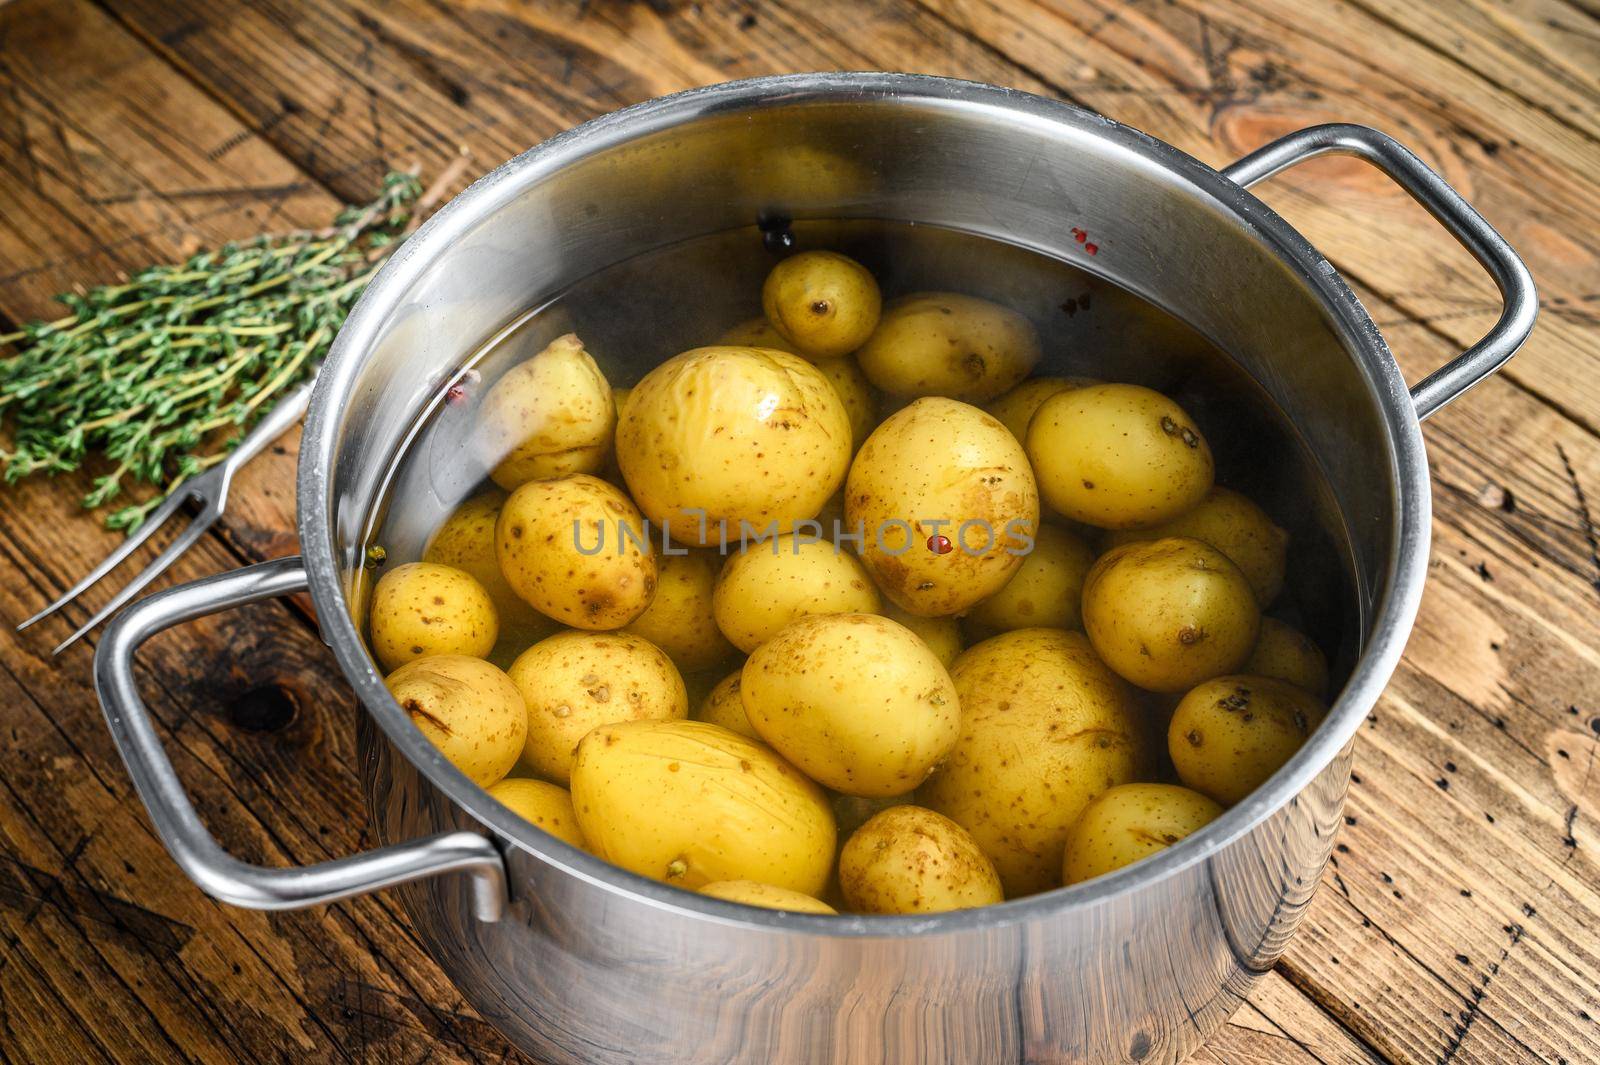 Boiled baby Potatoes in a saucepan. Wooden background. Top view by Composter